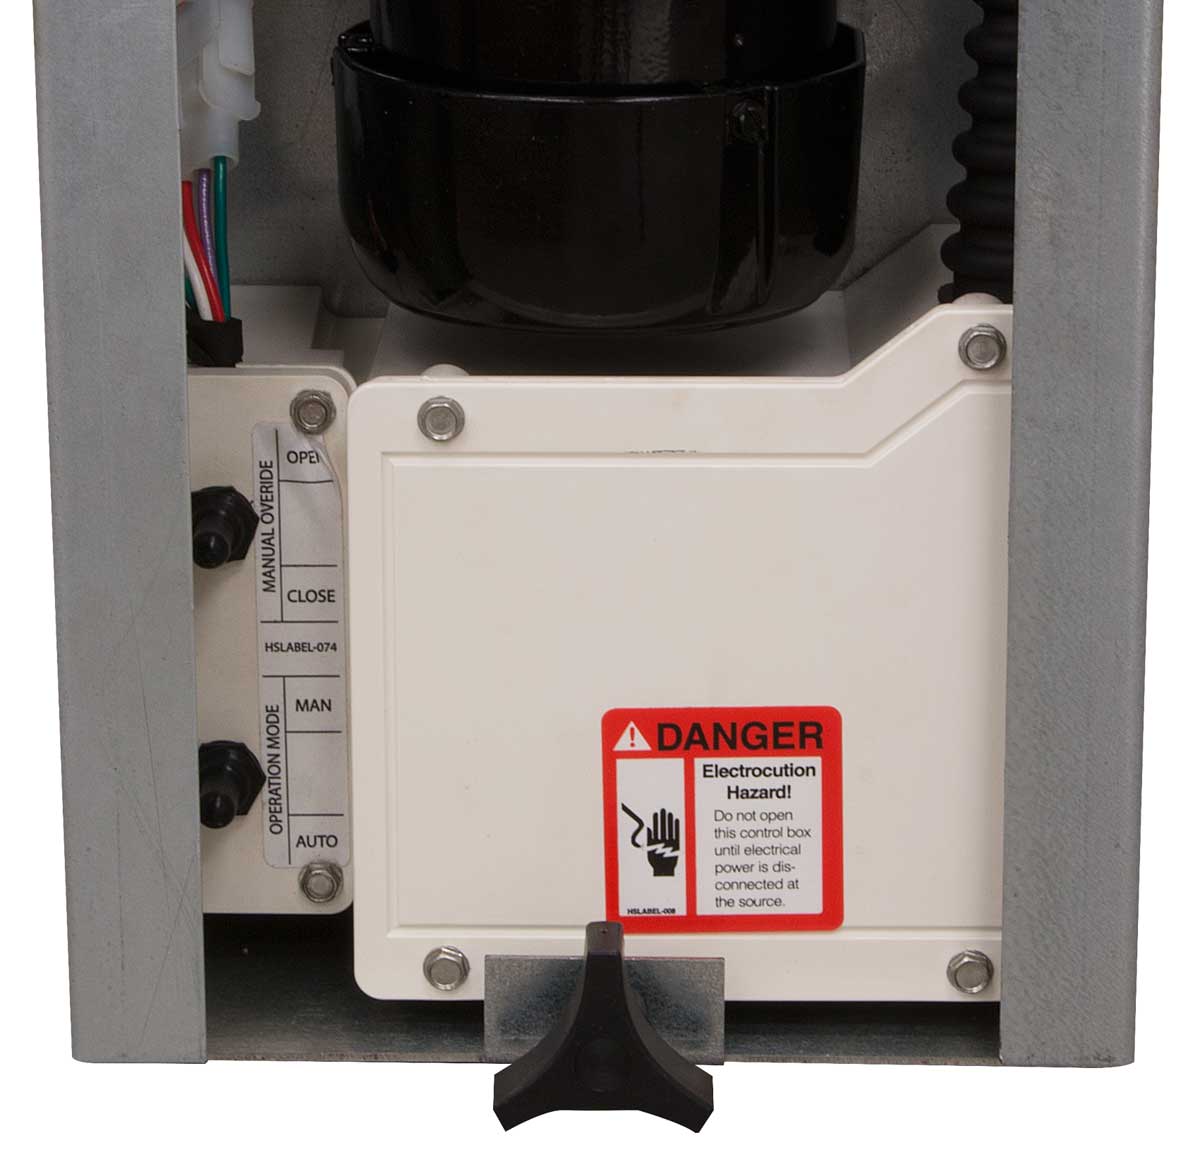 Localized controls are conveniently located next to the protective water-resistant electrical connection enclosure.